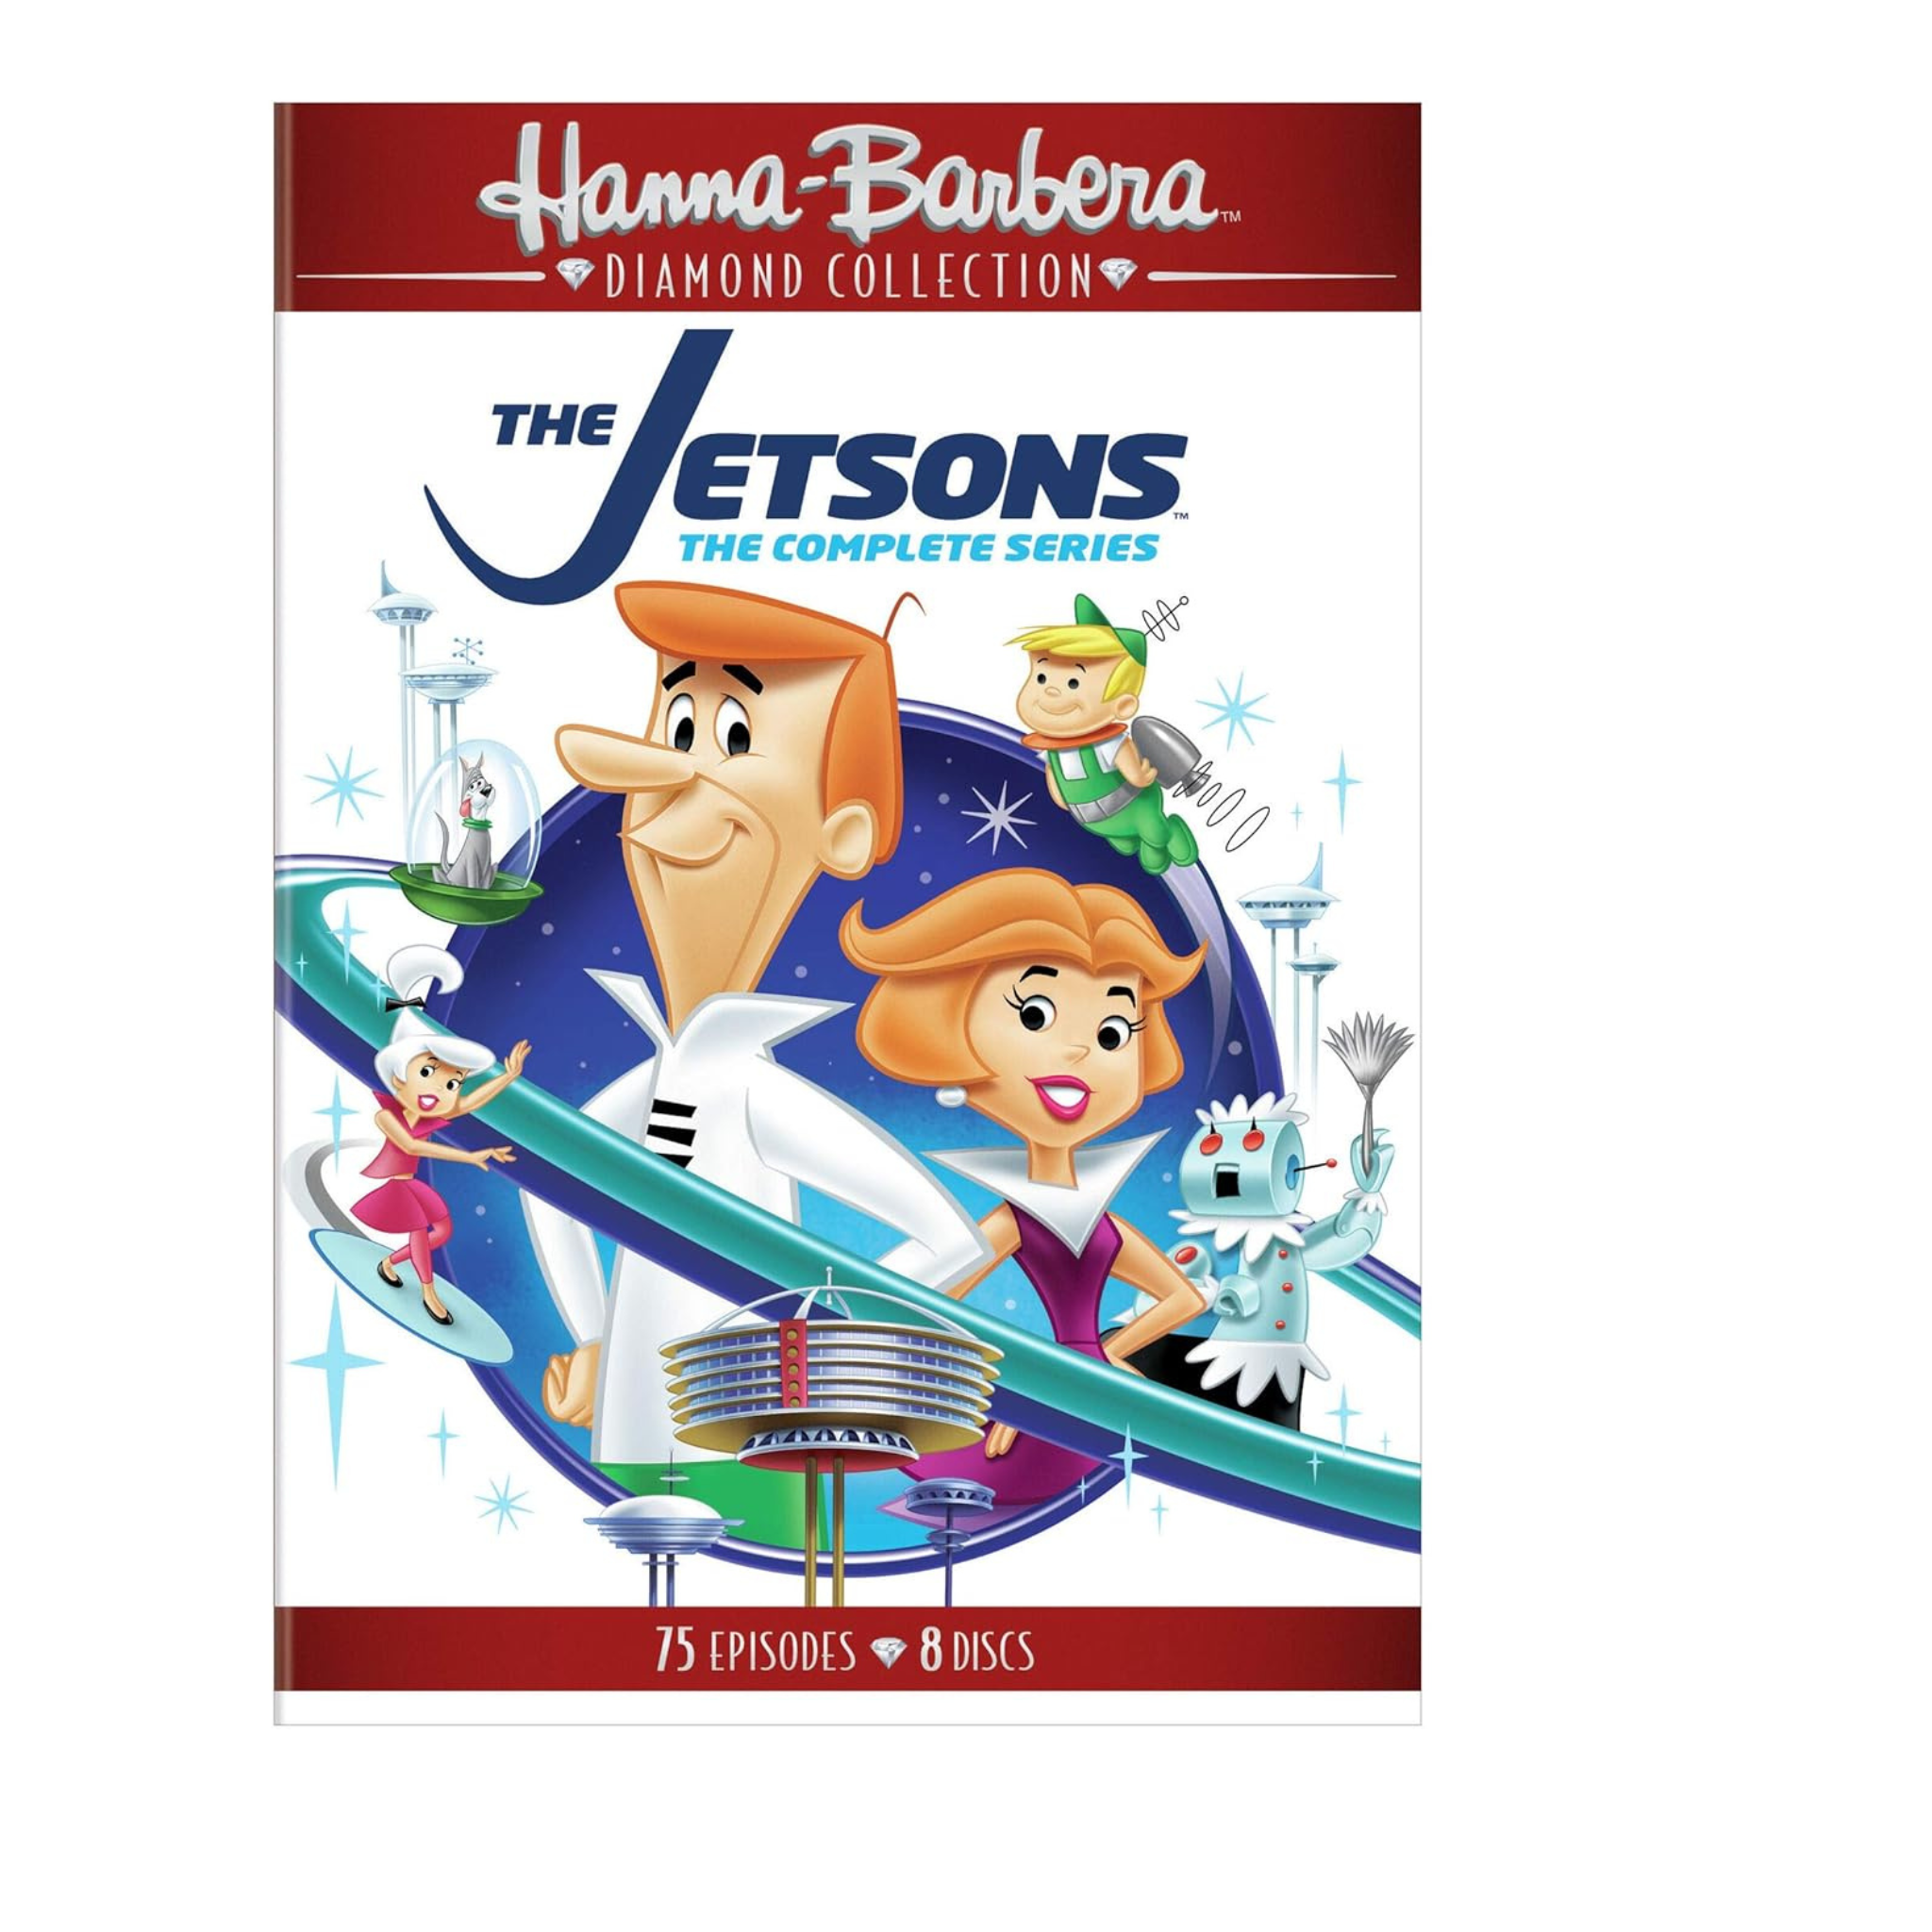 The Jetsons: The Complete Series